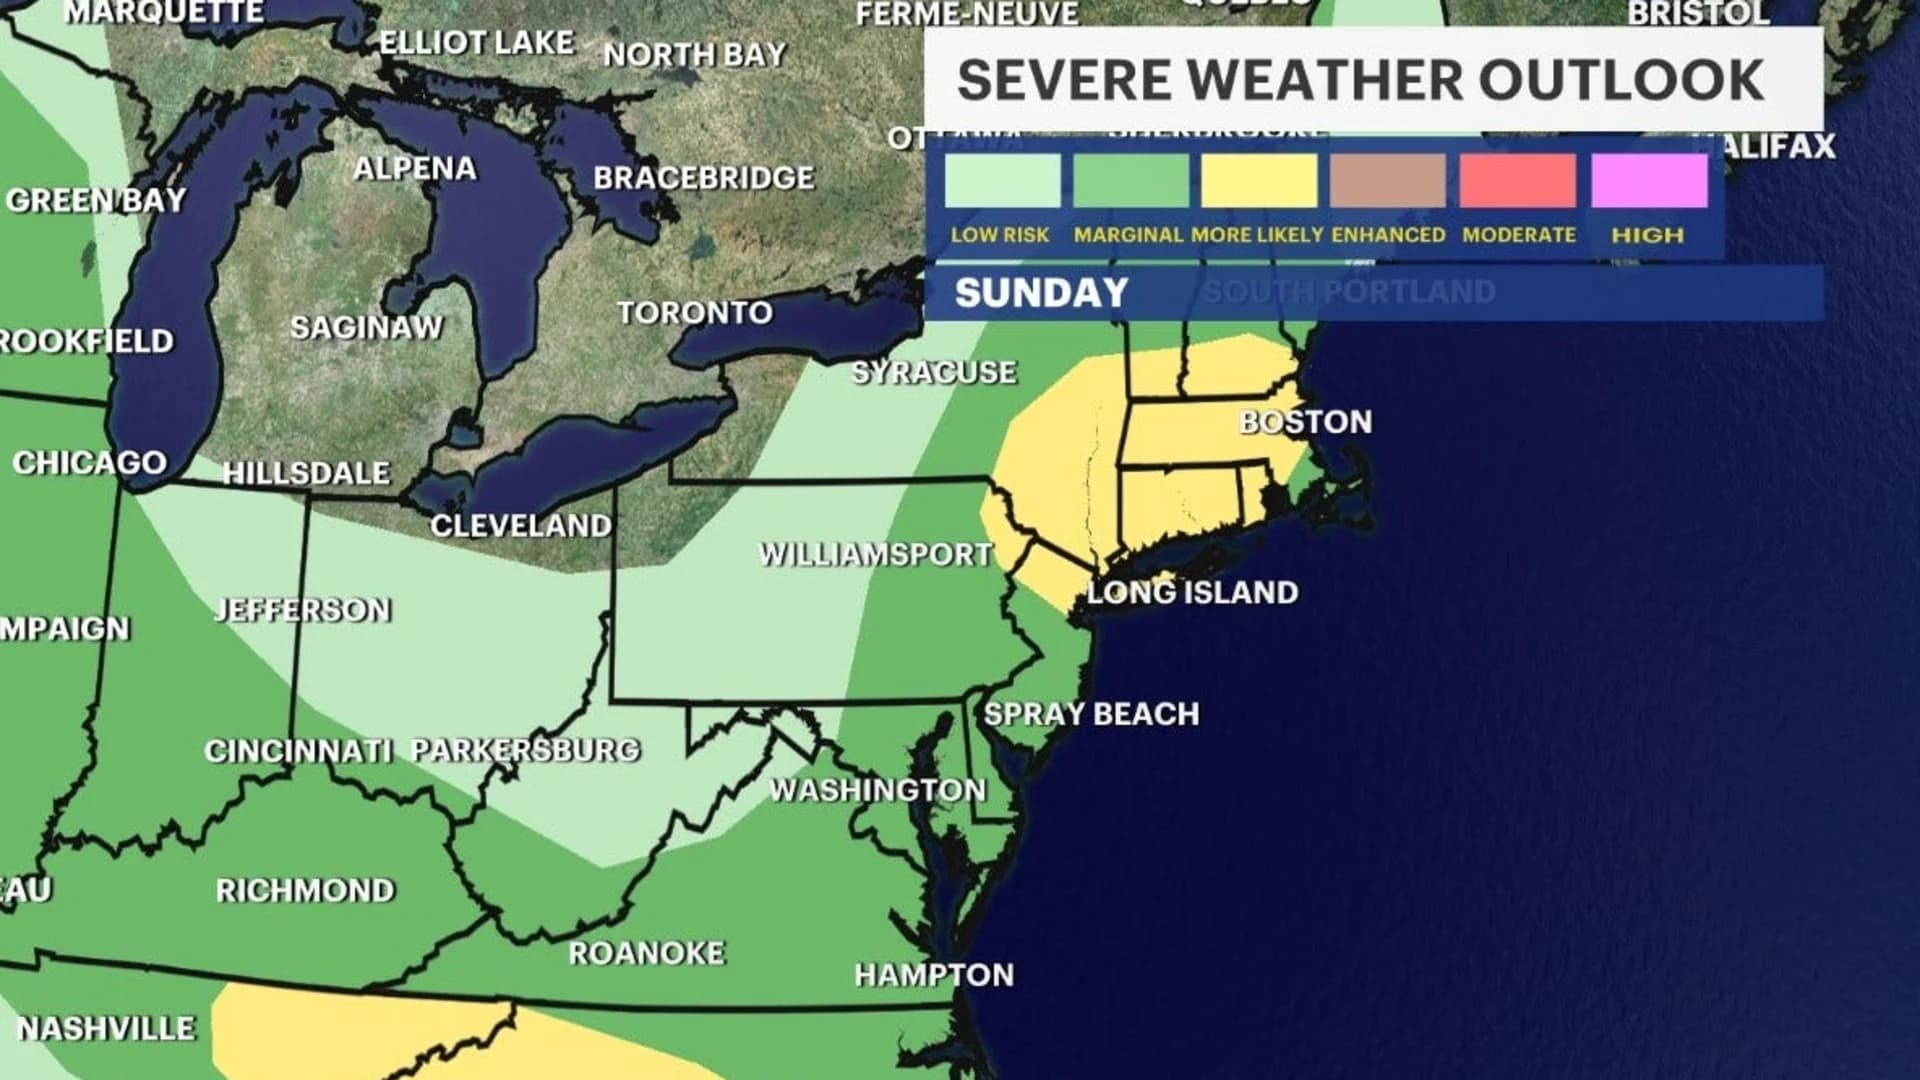 Severe thunderstorm watch issued for NYC; storms could bring gusty winds, hail